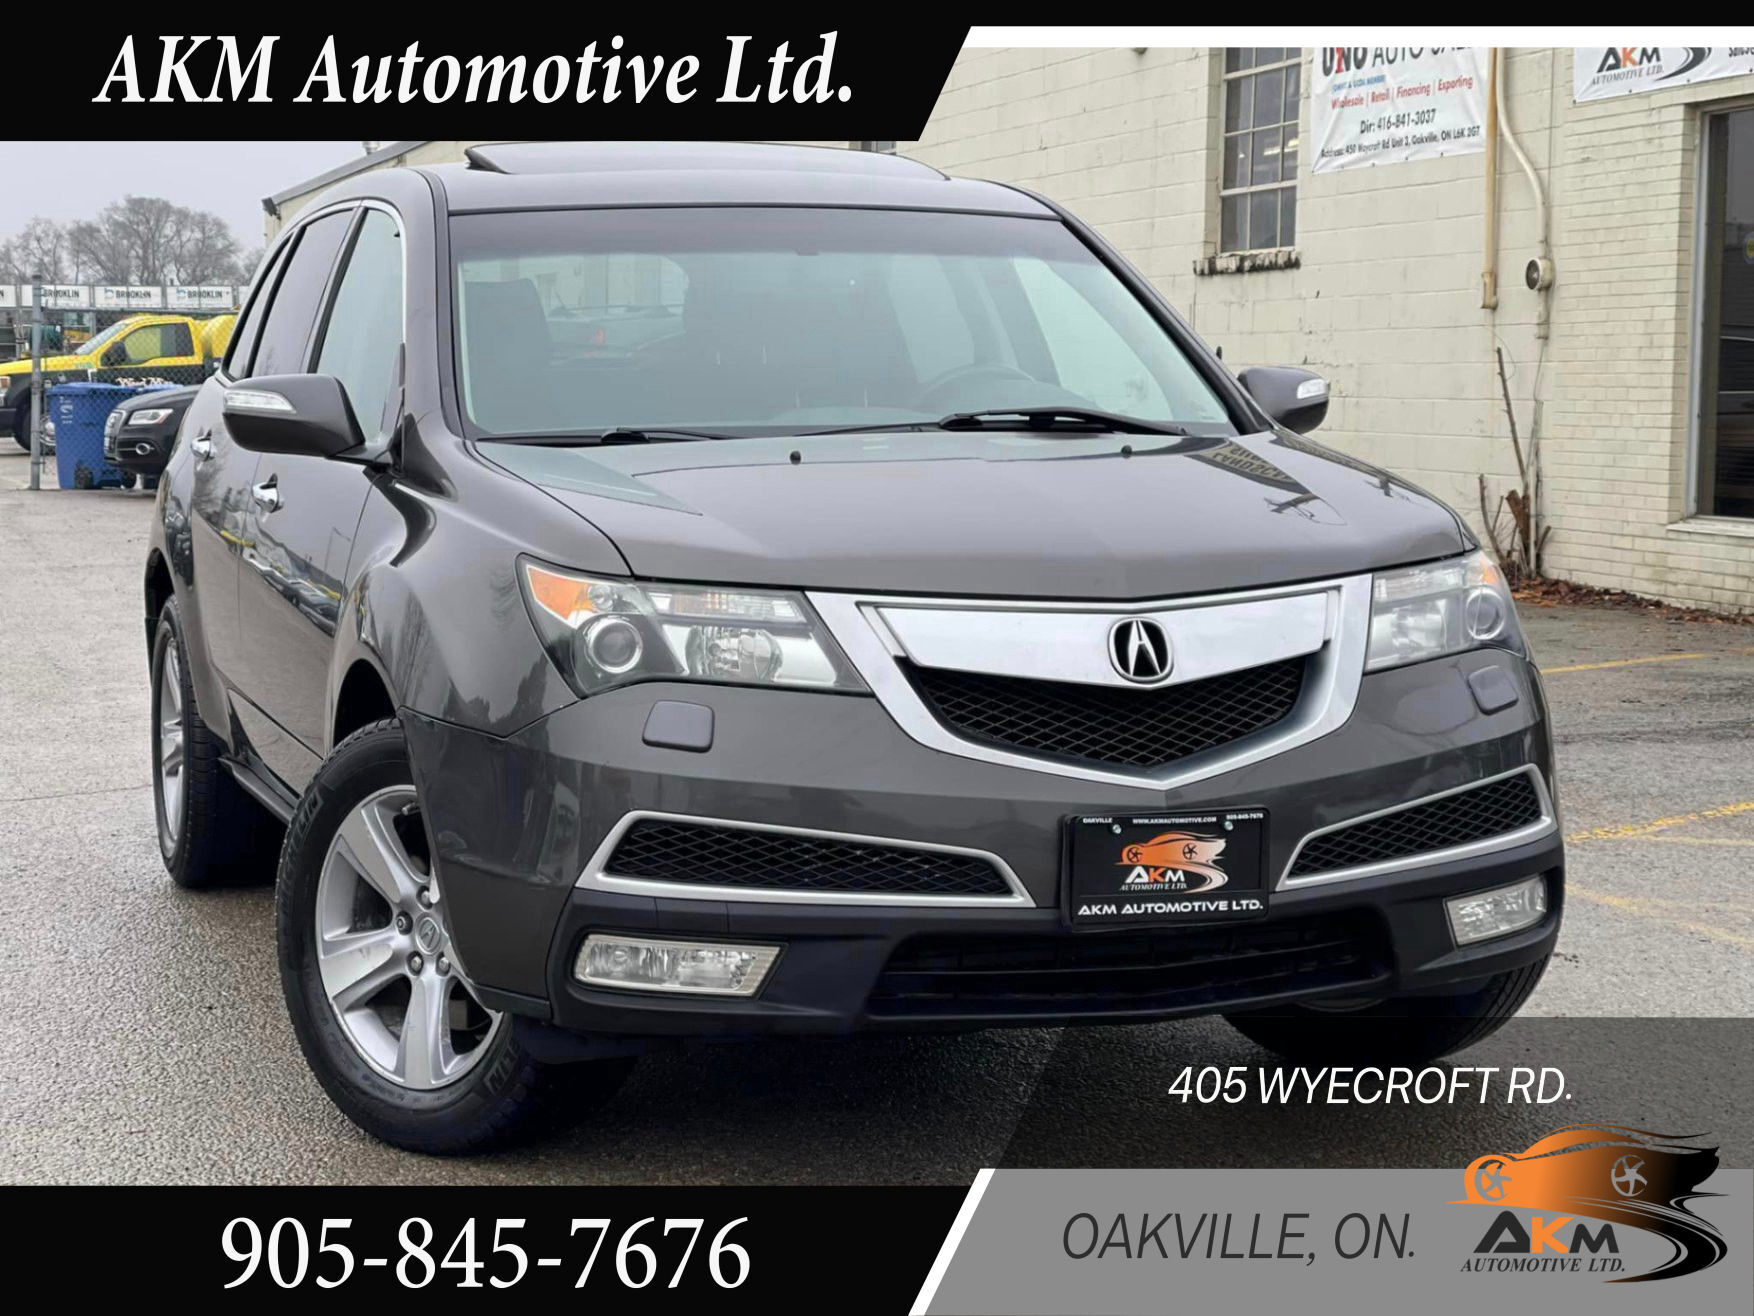 2011 Acura MDX AWD 4dr, 7 passengers, Certified